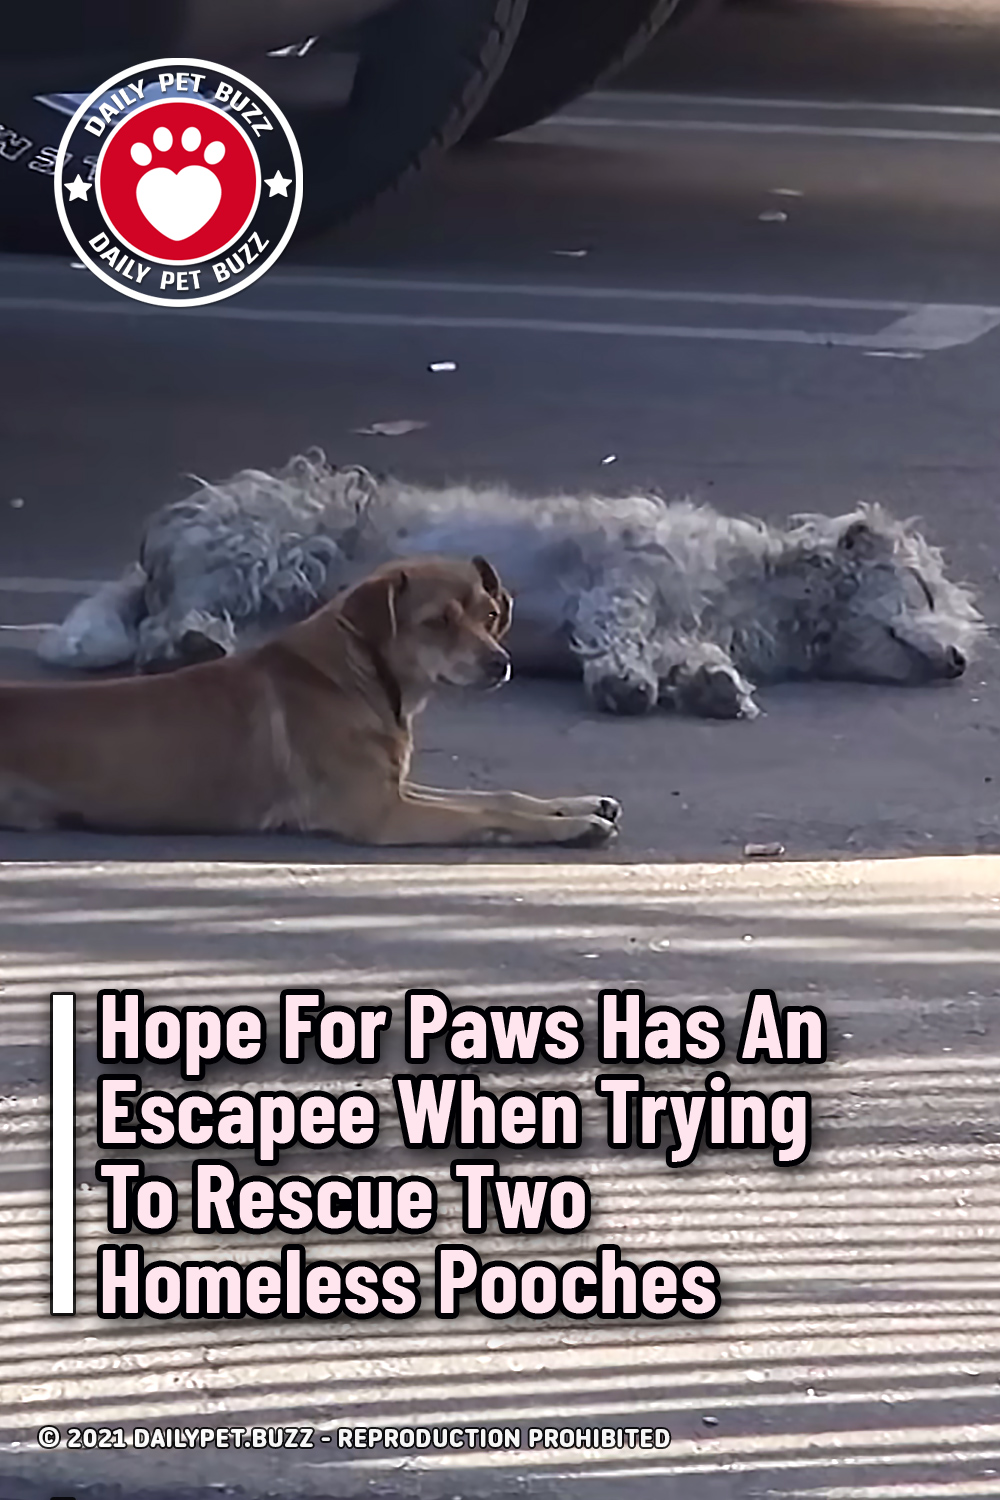 Hope For Paws Has An Escapee When Trying To Rescue Two Homeless Pooches